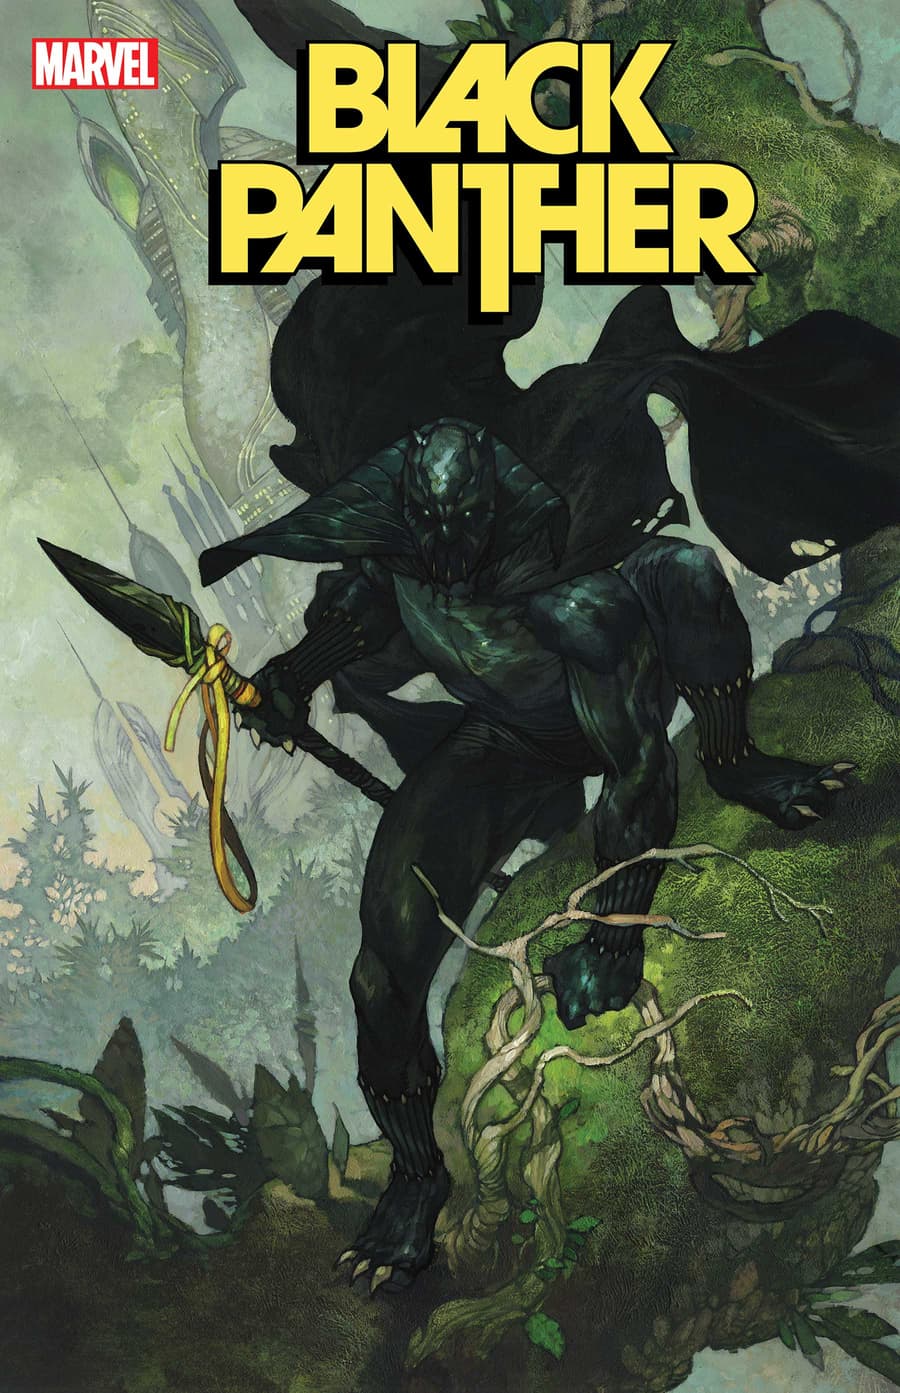 BLACK PANTHER #1 variant cover by Simone Bianchi